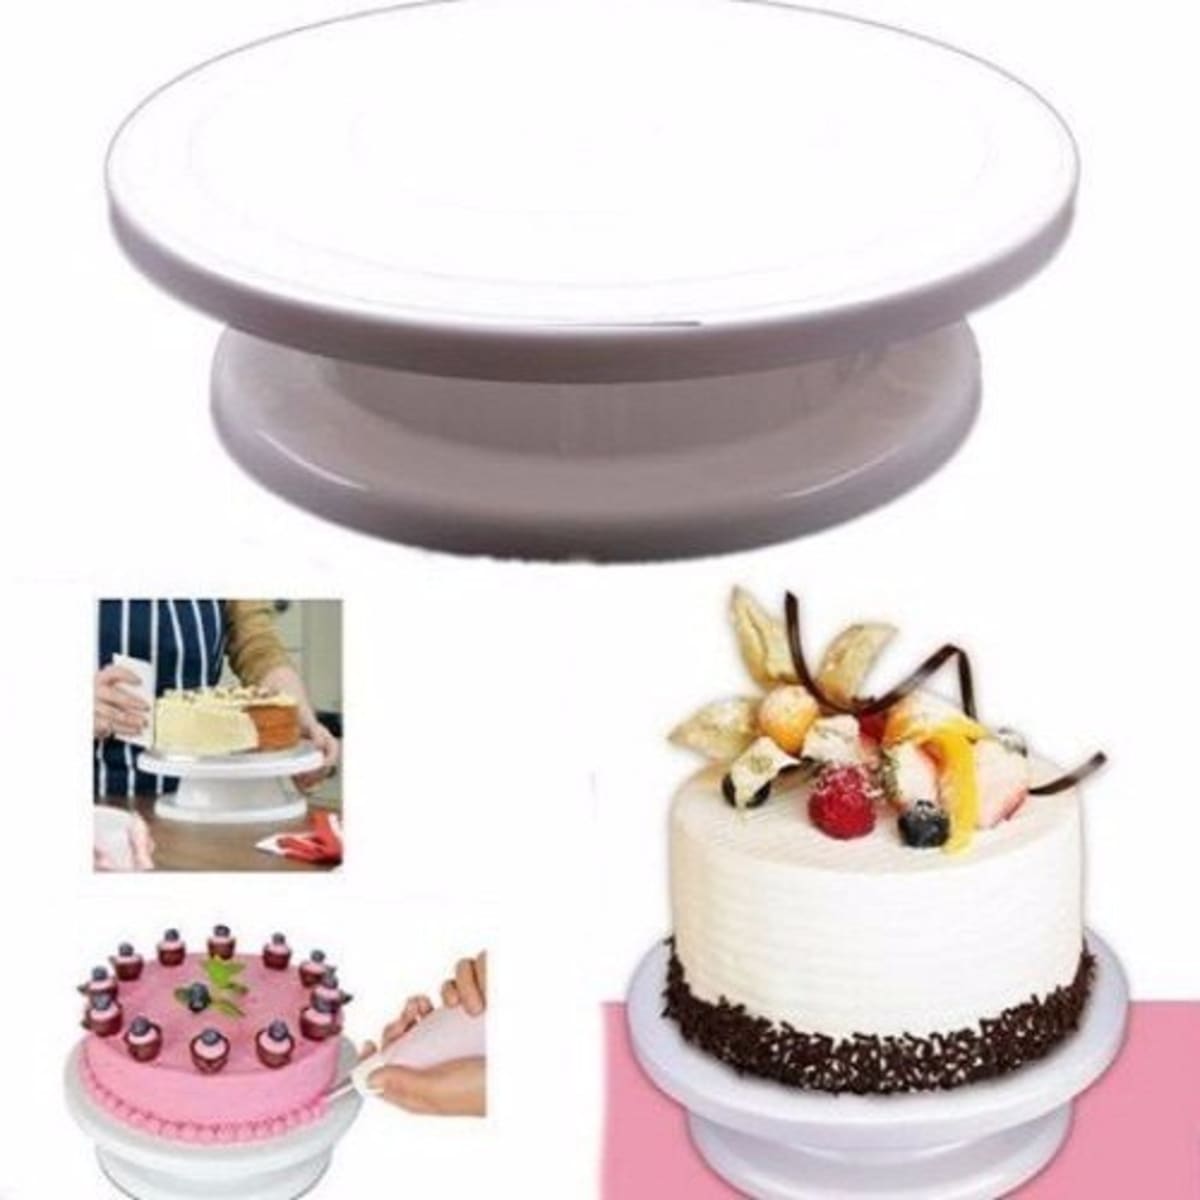 Ateco Revolving Cake Stand with Cast Iron Base and Aluminum Turntable |  Williams Sonoma